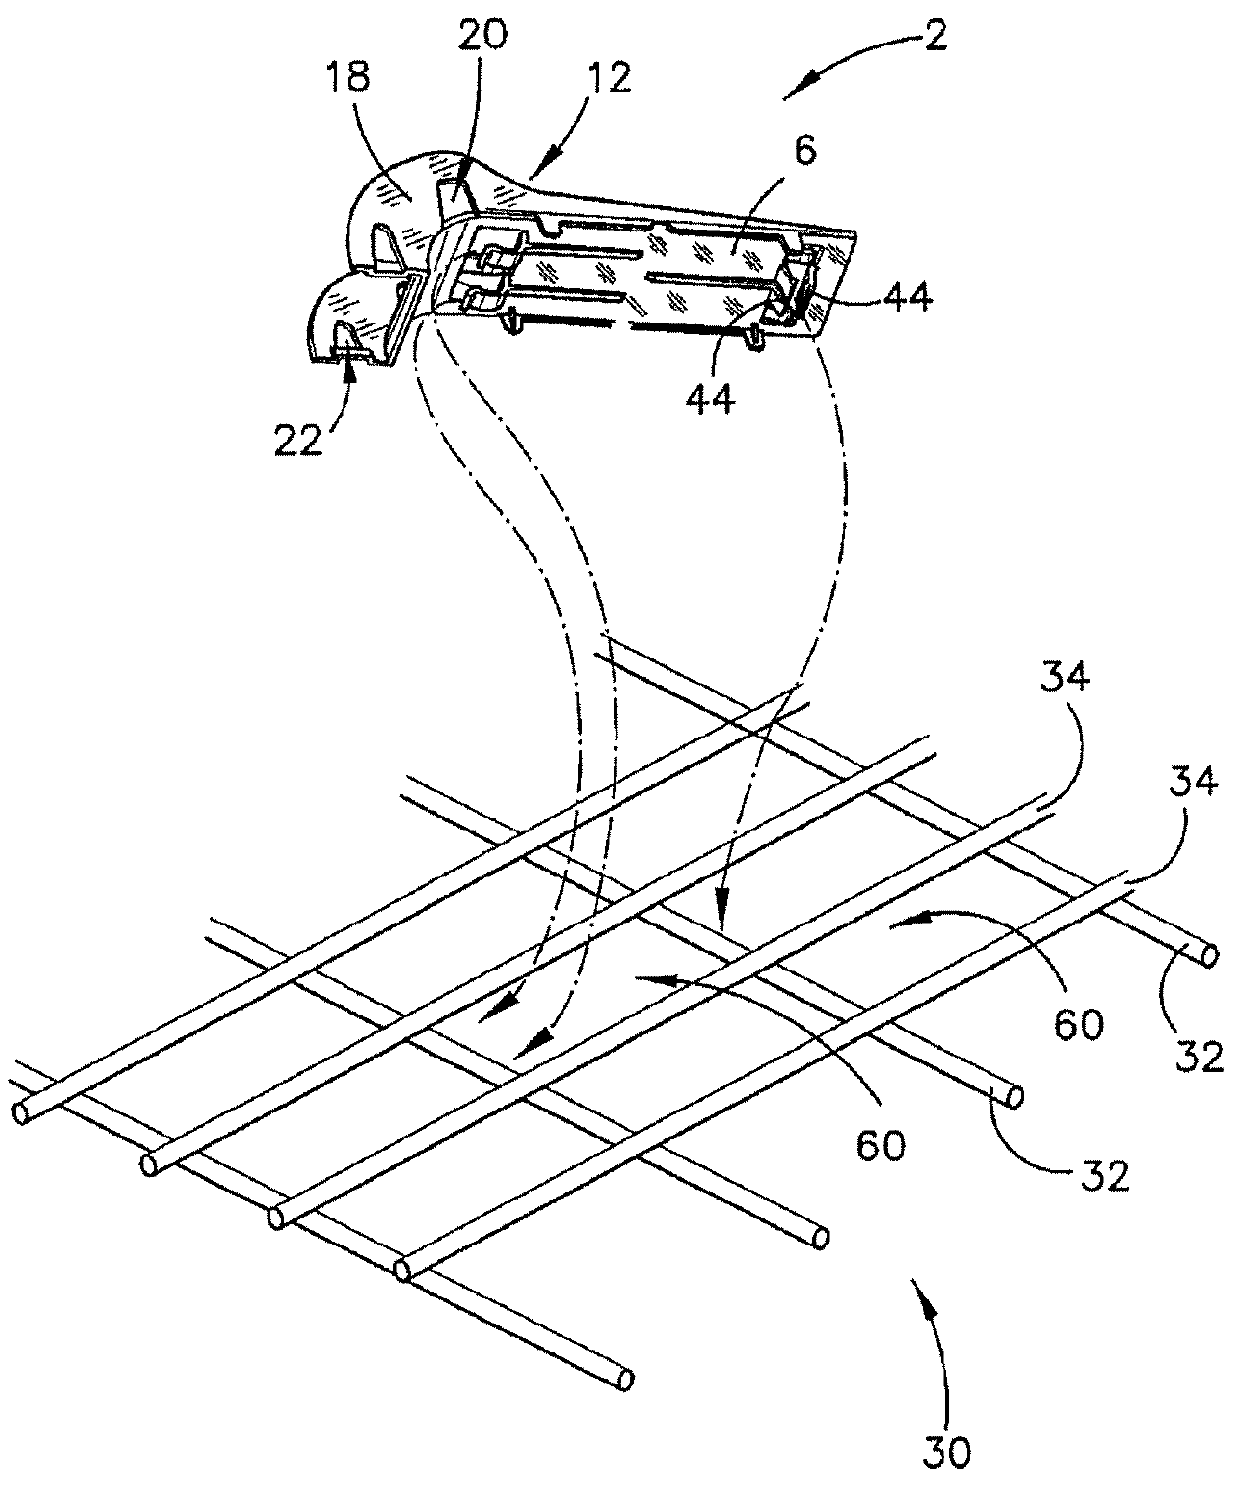 Cable Support and Methods of Supporting Cables